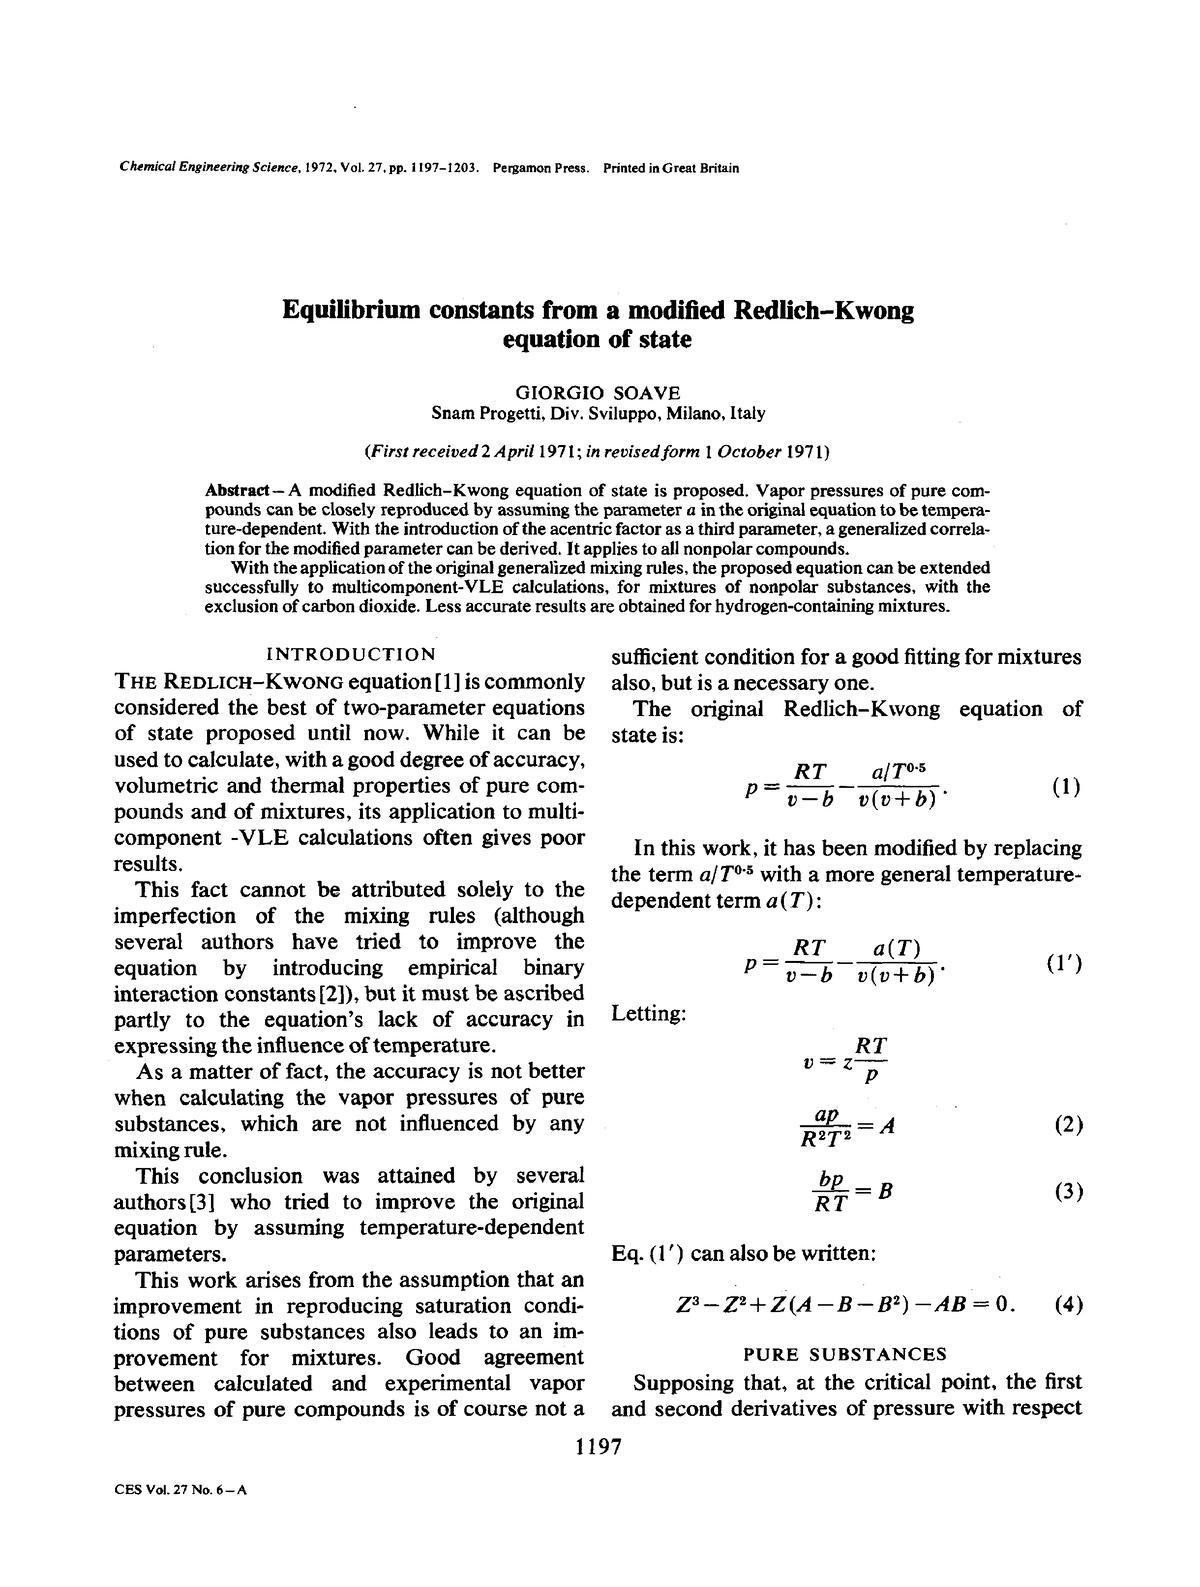 [Chemical Engineering Science 1972-jun vol. 27 iss. 6] Giorgio Soave ...